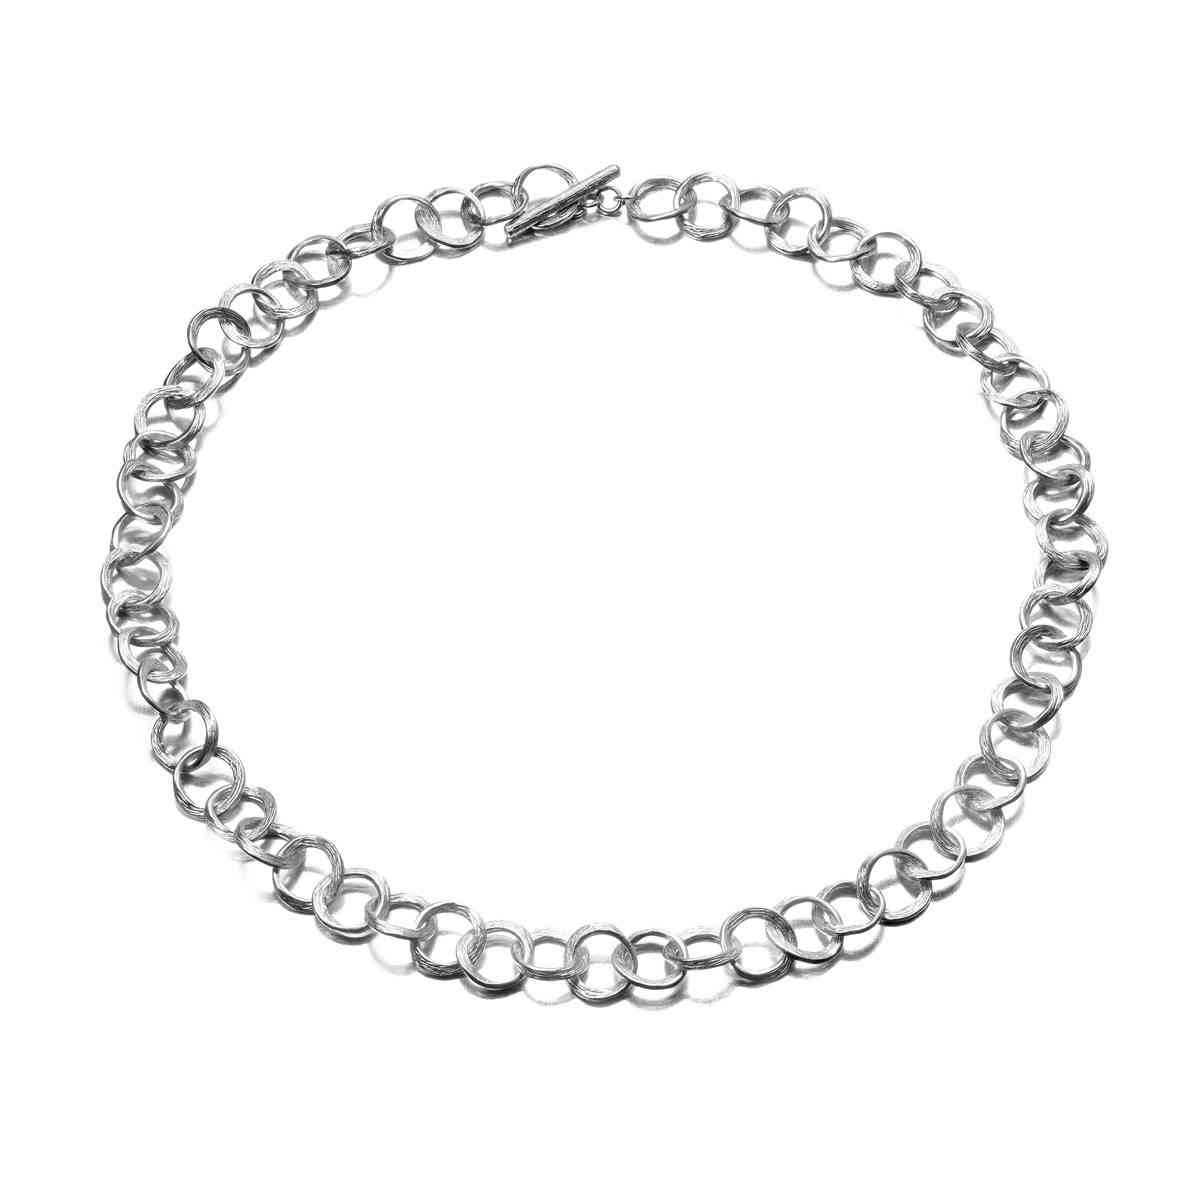 FLORENCE Necklace in Silver.